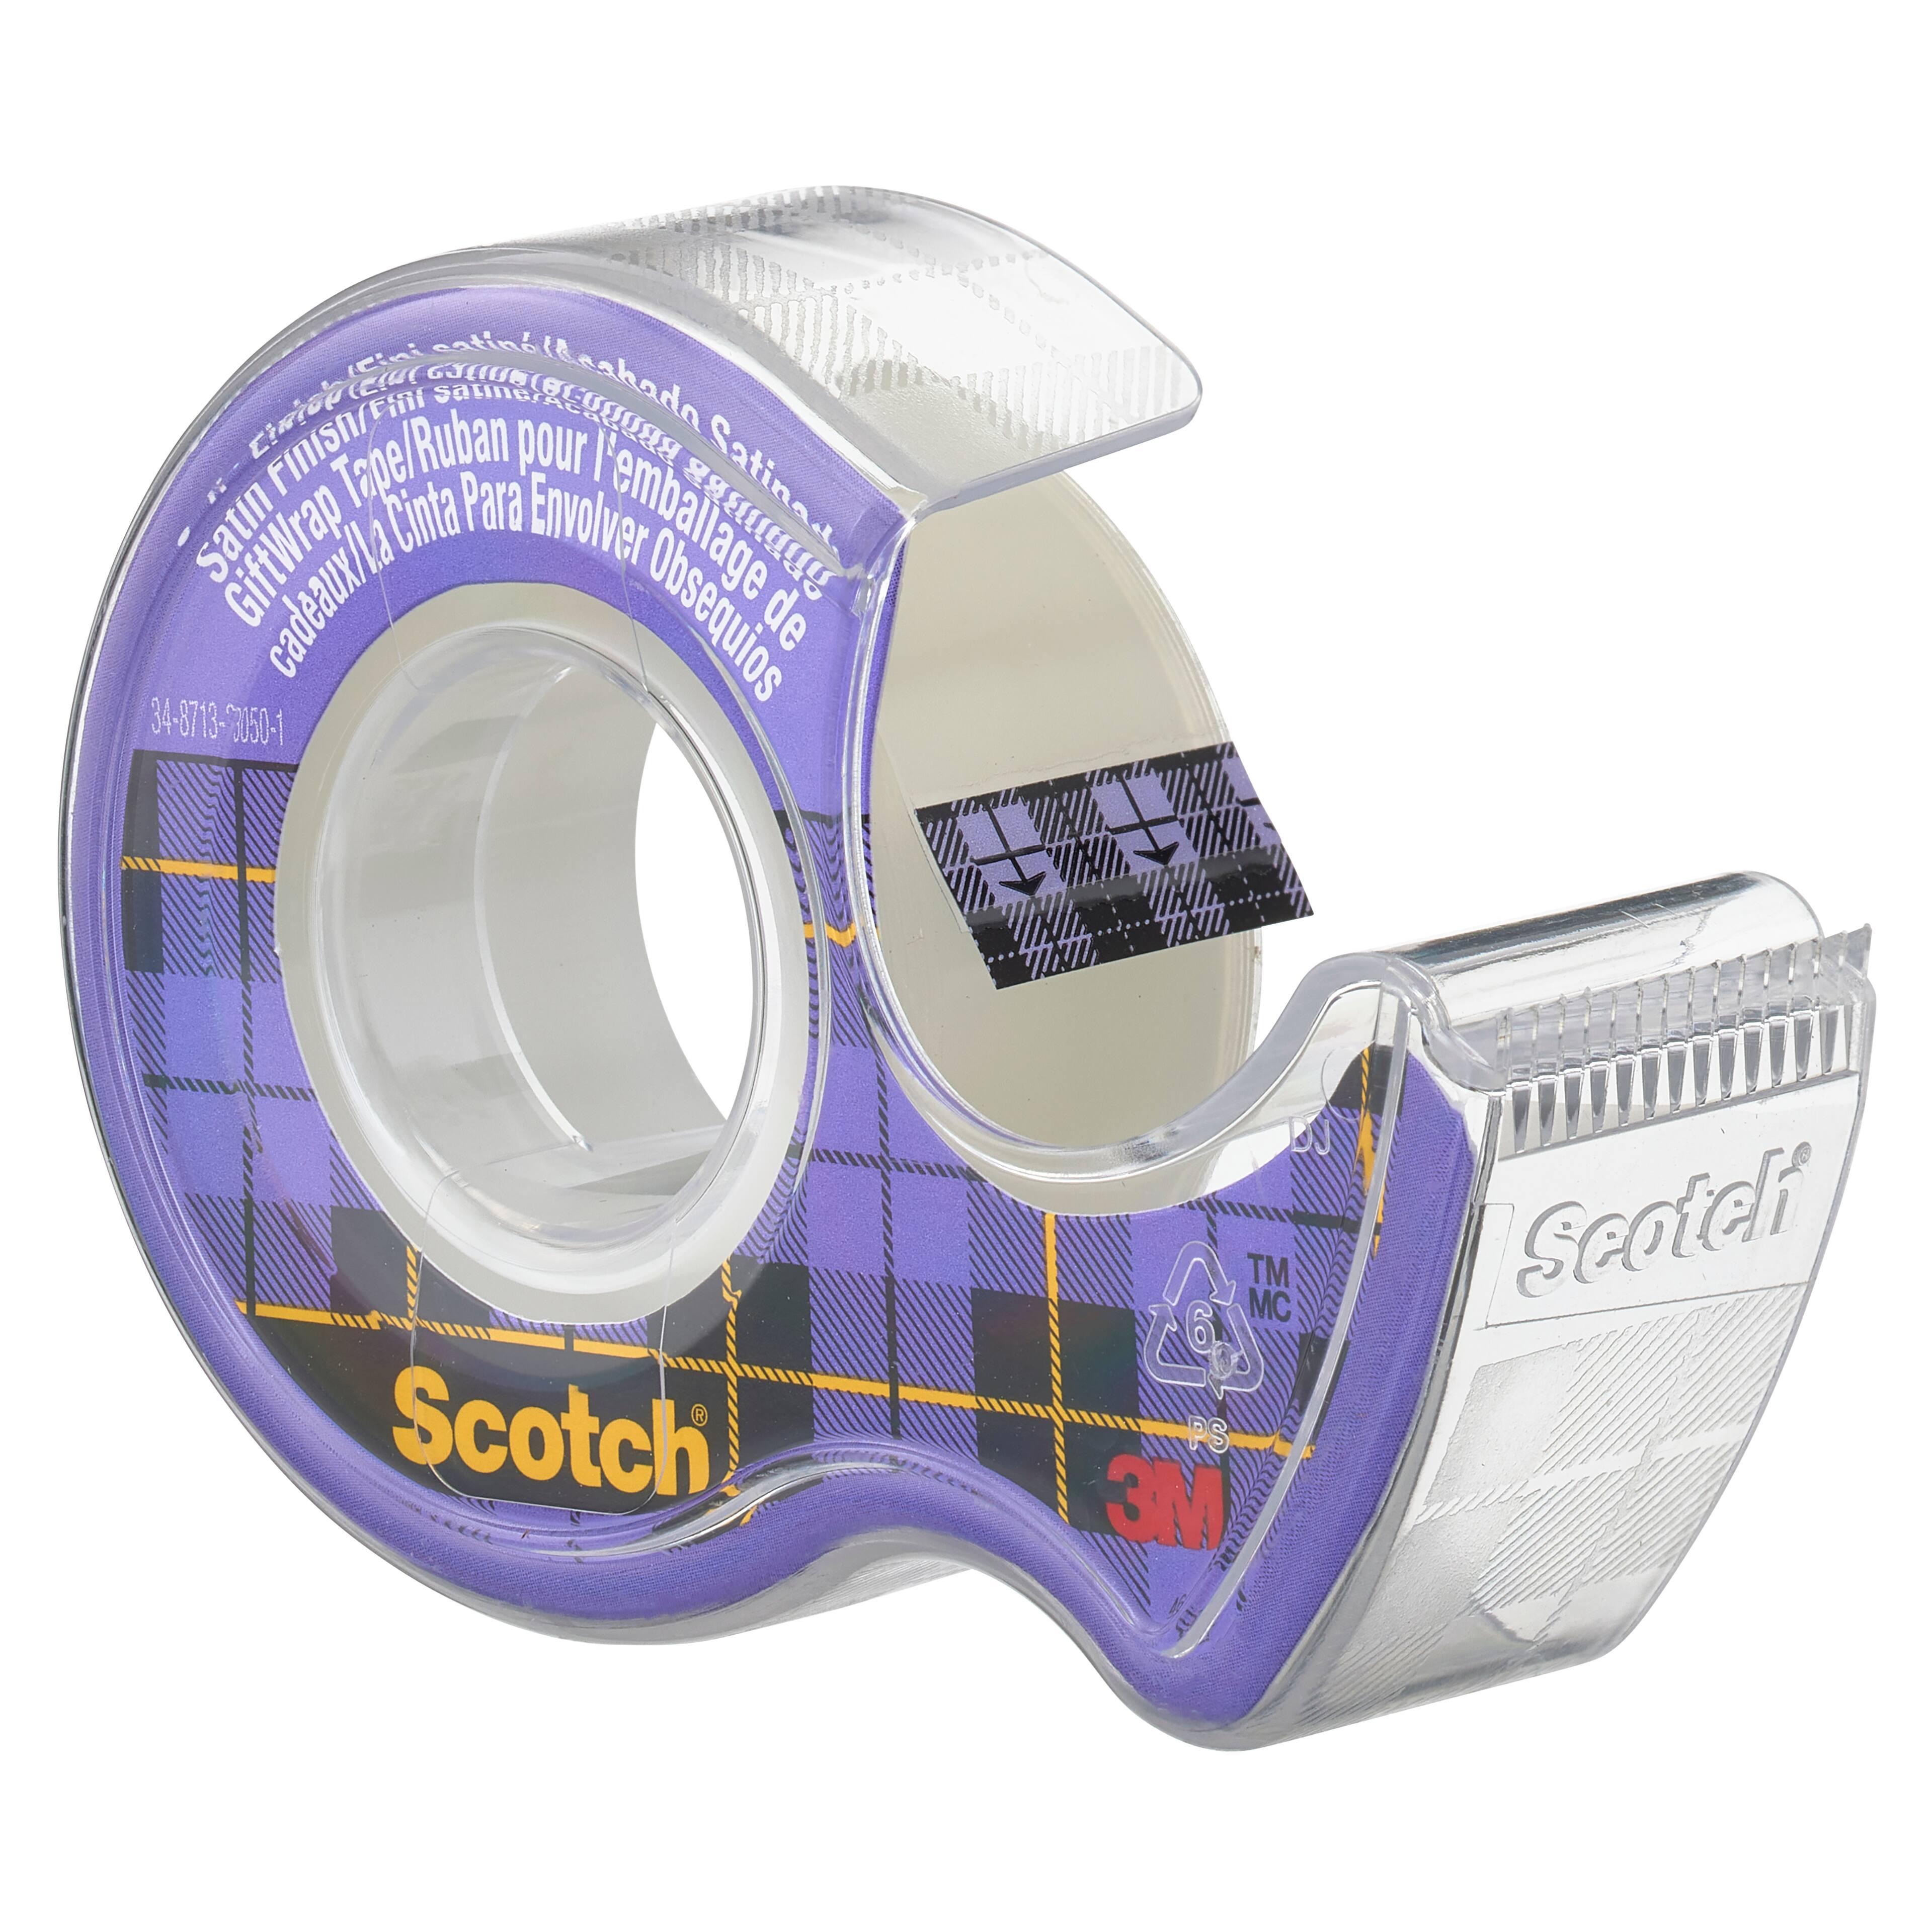 Scotch® GiftWrap Satin Tape, Refill Pack, 19 mm x 25 m, 1 Roll